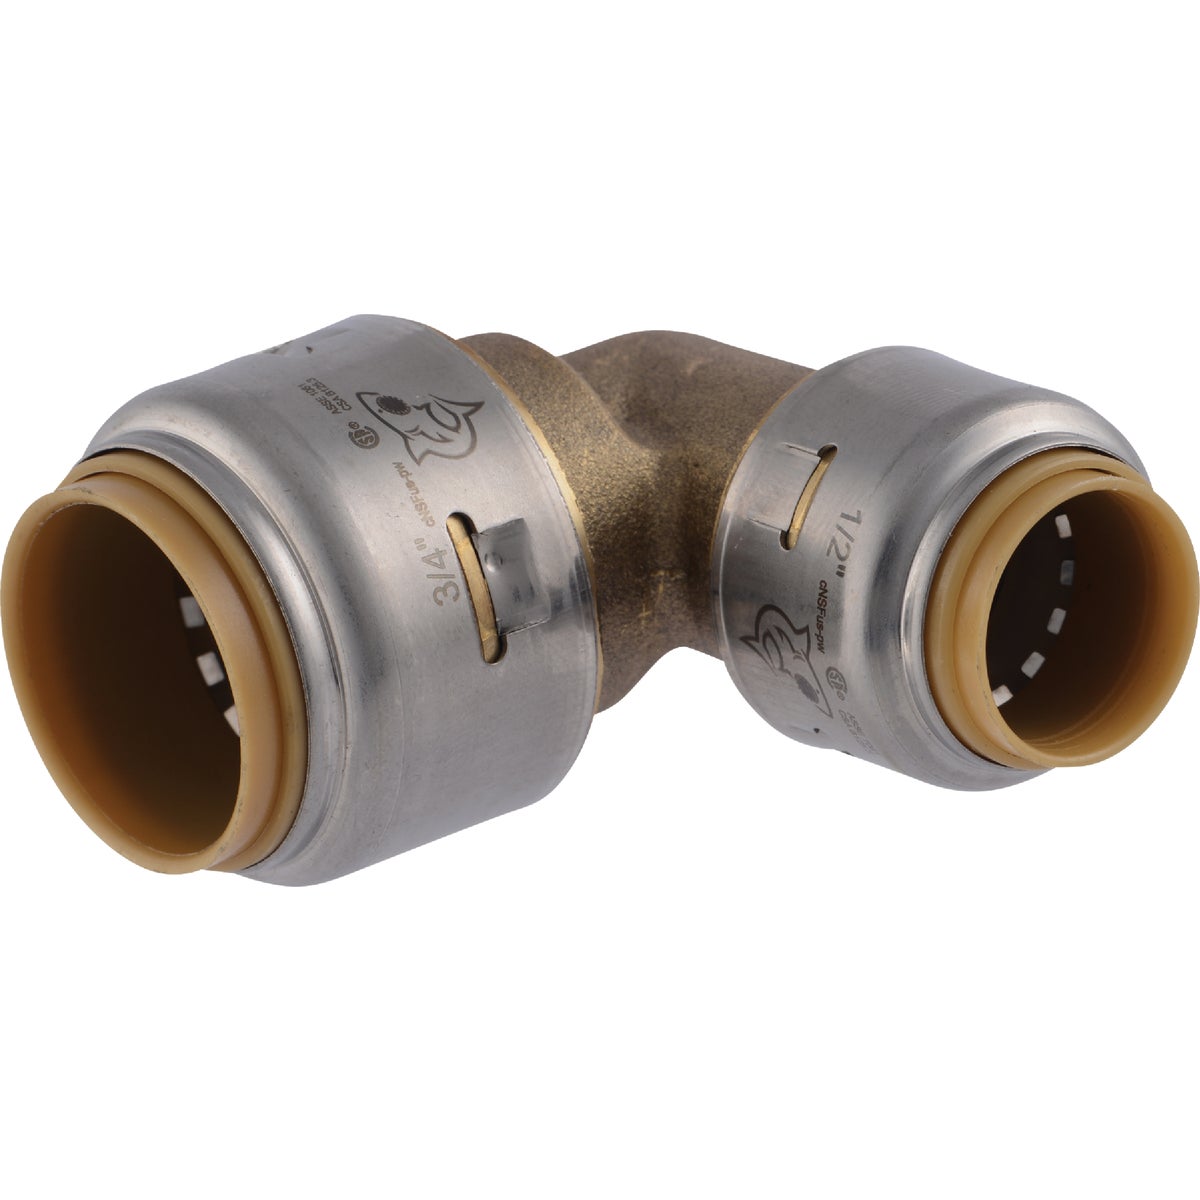 Item 464349, SharkBite Max push-to-connect fittings allow you make pipe connections with